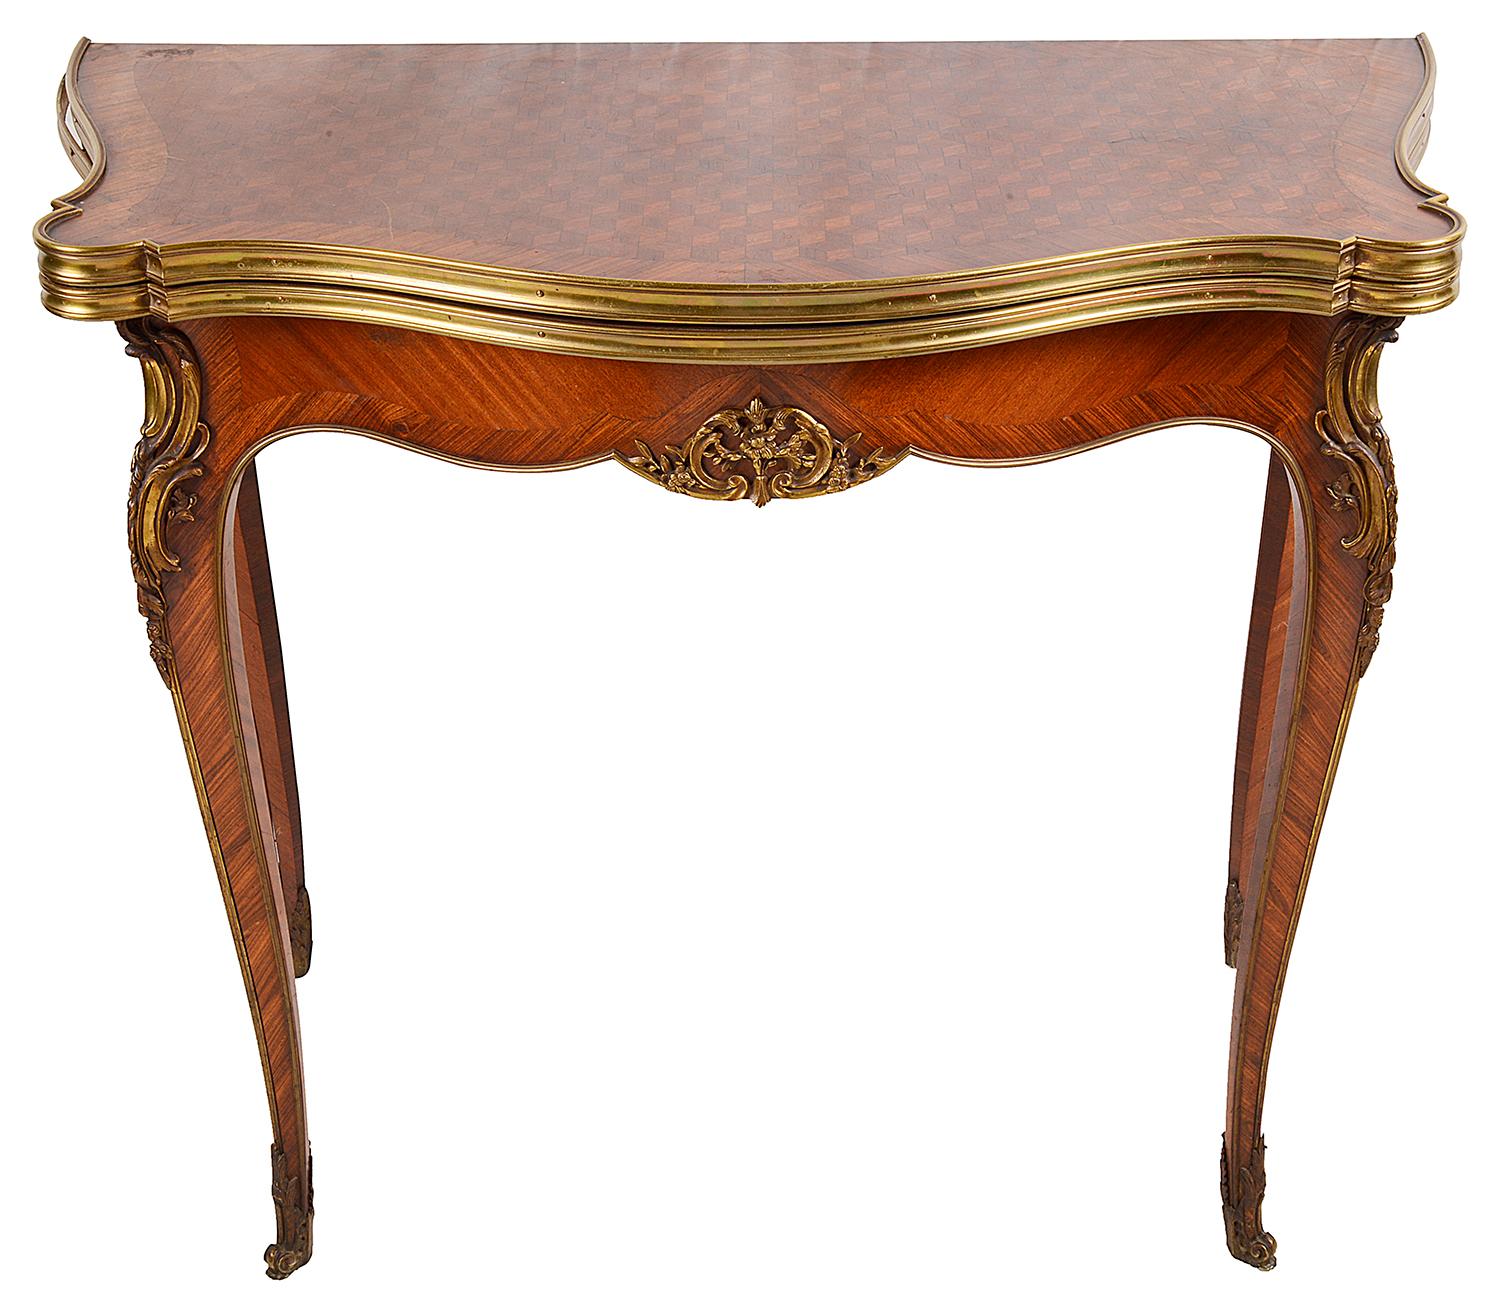 A good quality late 19th century Louis XVI style parquetry inlaid serpentine fronted card or games table, having gilded ormolu moldings and mounts, the top hinging open to reveal the baize covered card table. Raised on elegant cabriole legs,